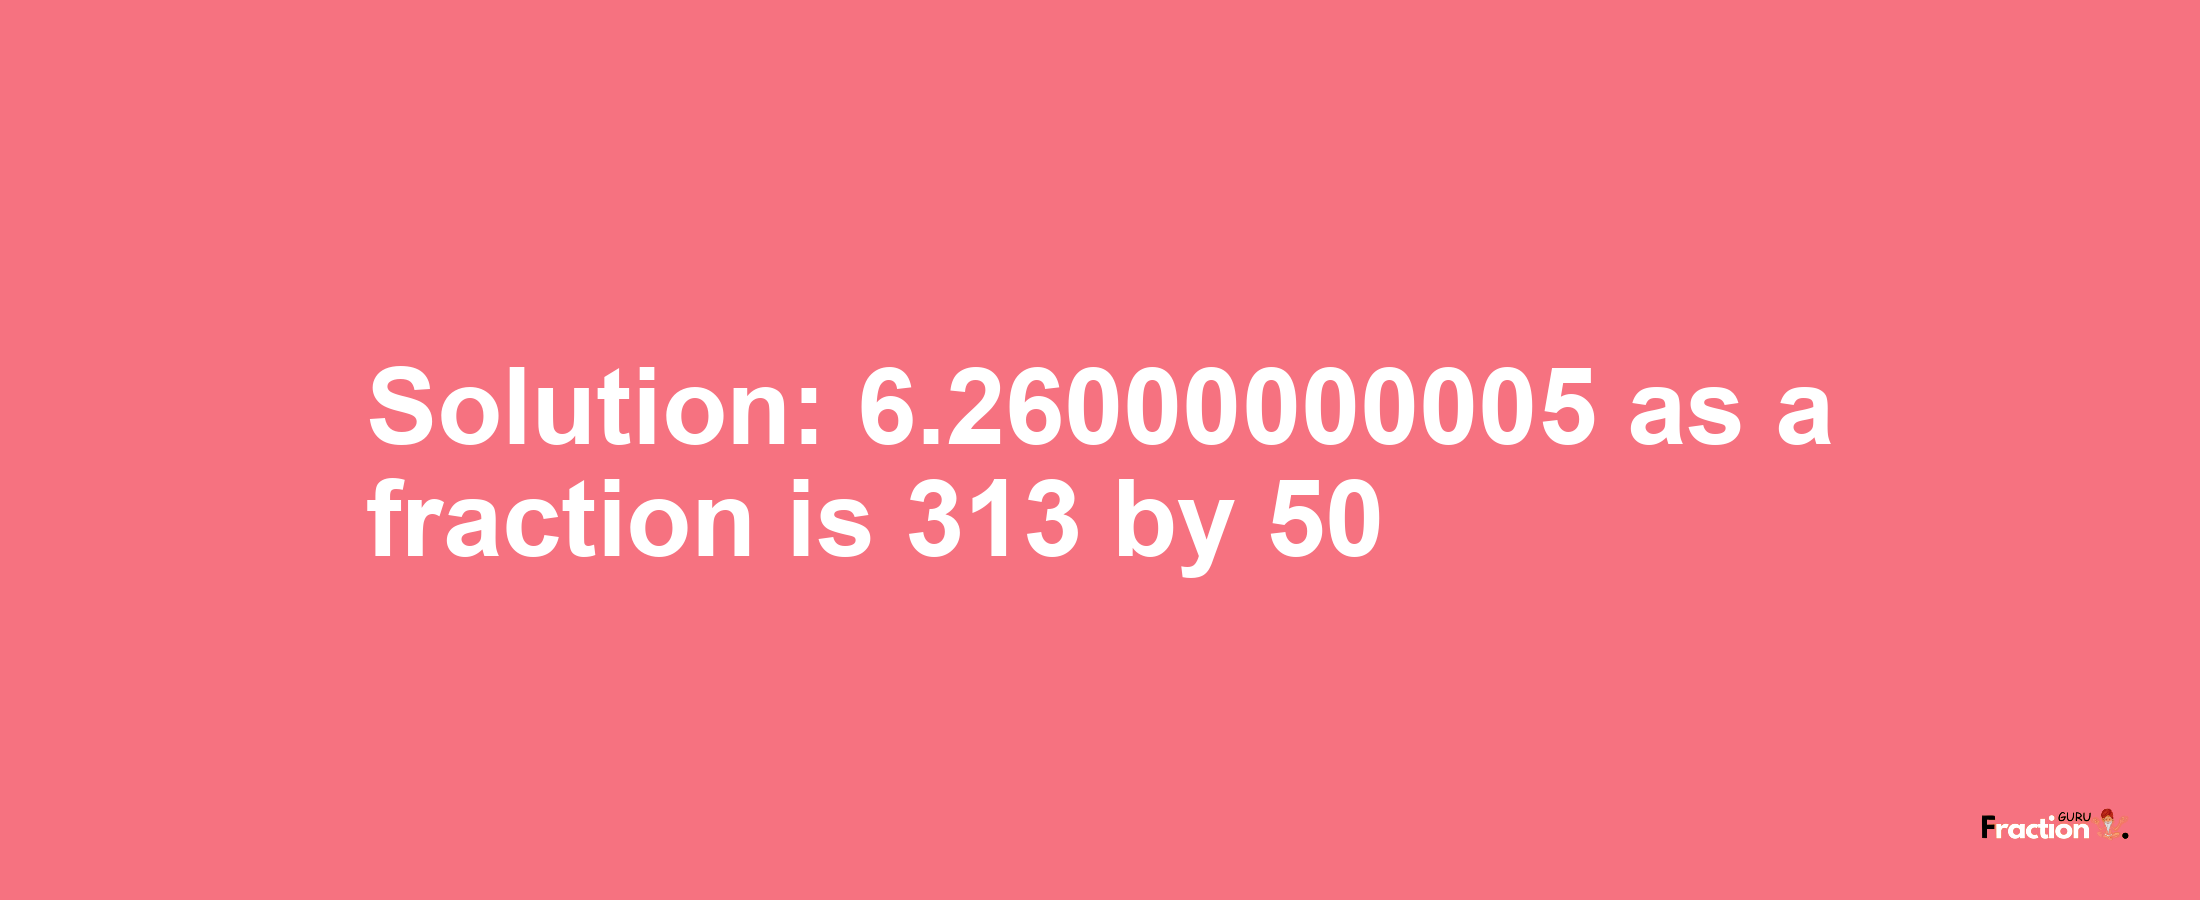 Solution:6.26000000005 as a fraction is 313/50